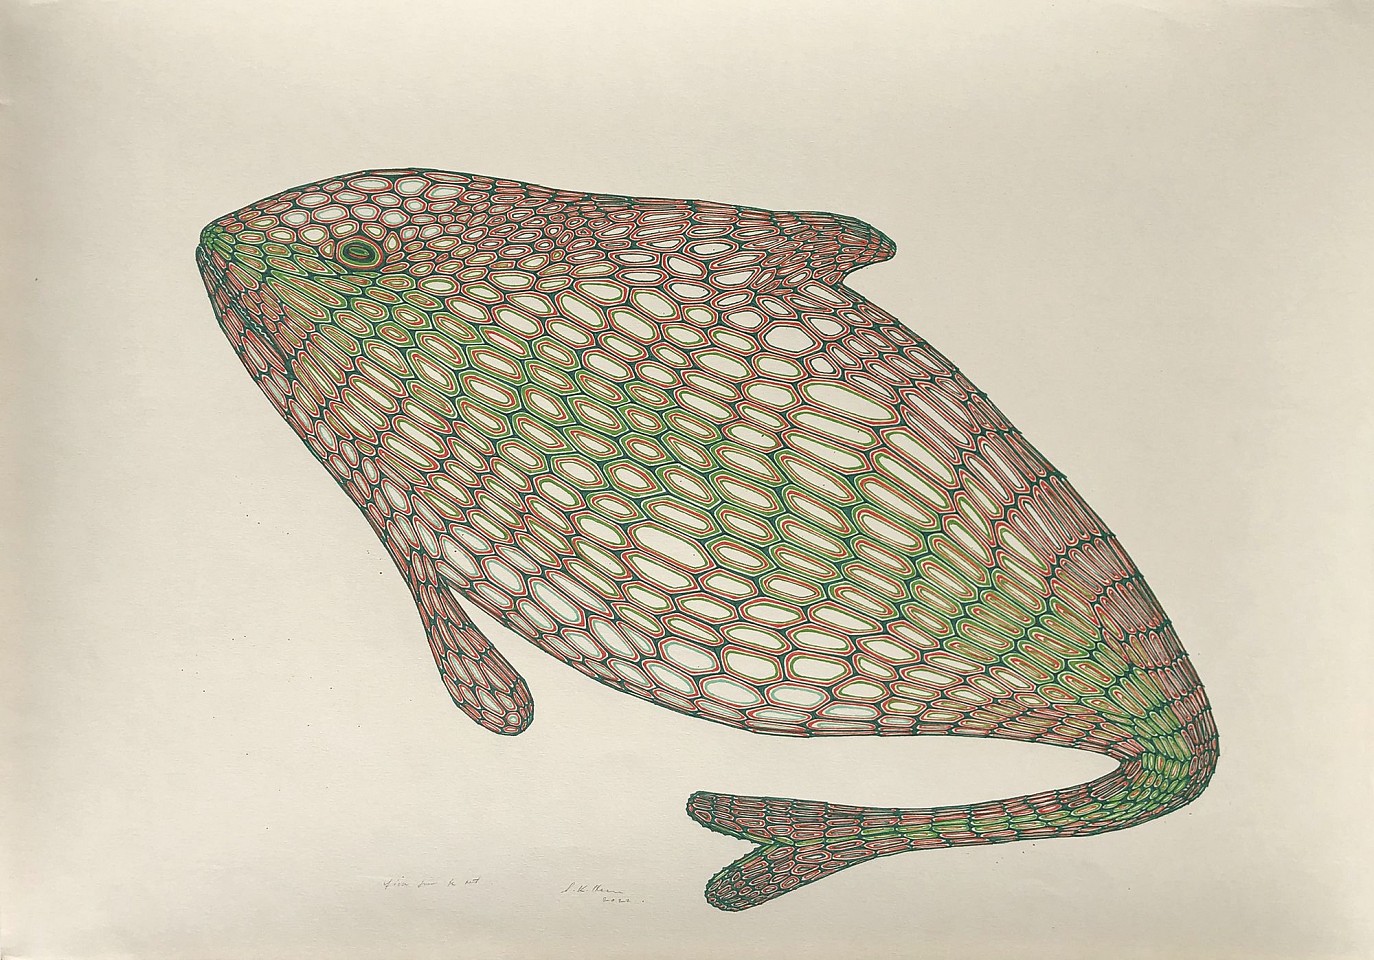 Stewart Helm, Fish From the Net, 2022
ink on paper, 17.75"x 25", 28"x 35.75" framed
SH-643
Price Upon Request